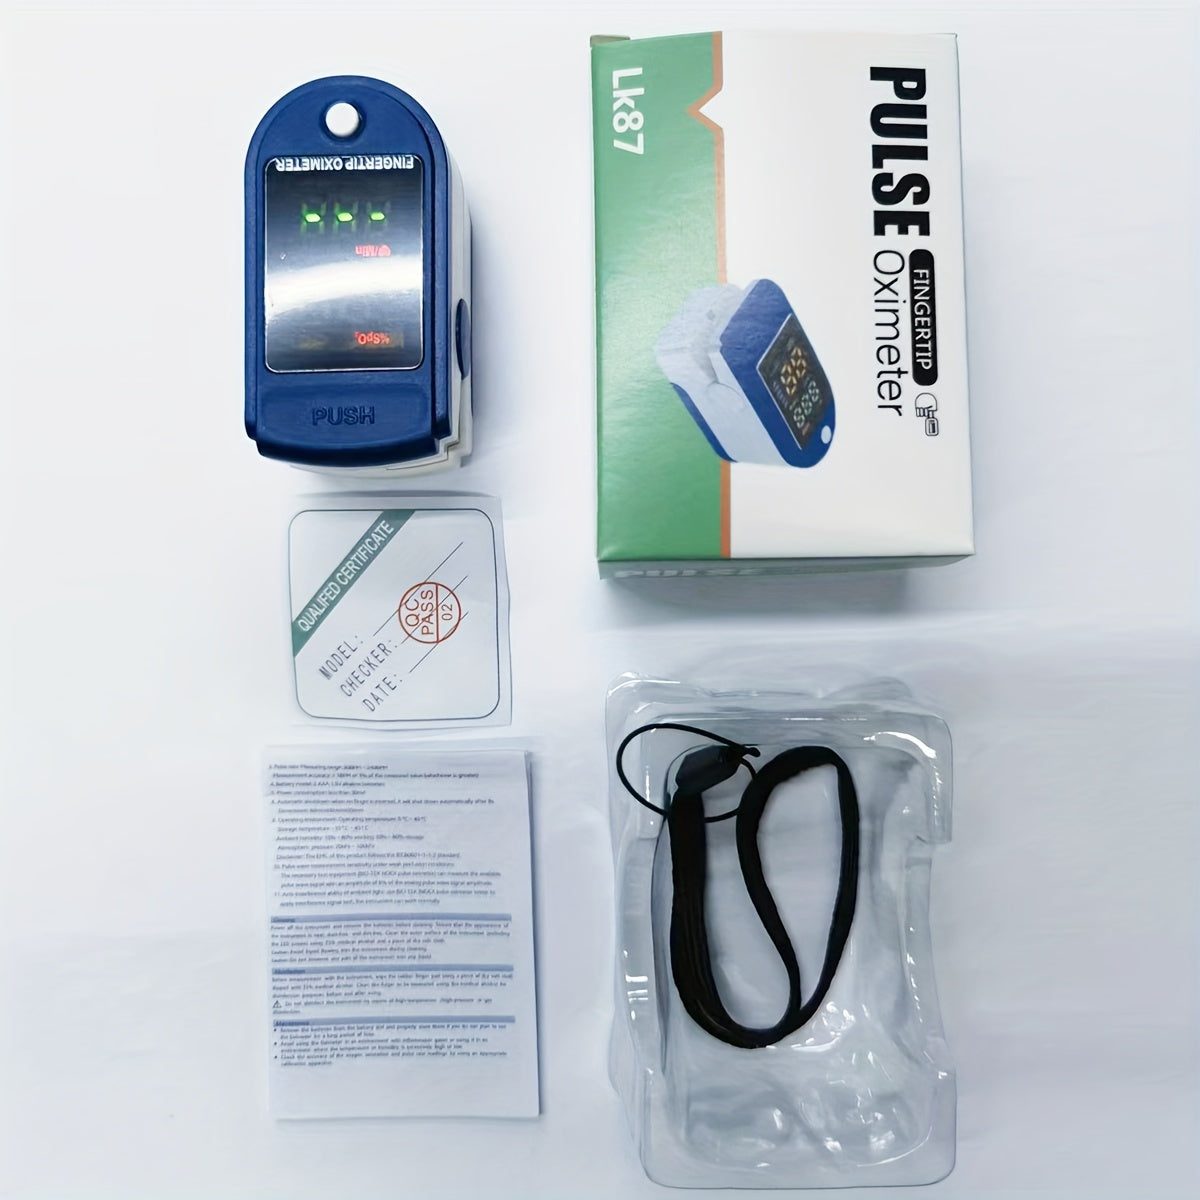 Fingertip Pulse Oximeter, Blood Oxygen Saturation Monitor (SpO2) With Pulse Rate Measurements And Pulse Bar Graph, Portable Digital Reading LED Display, Batteries Not Included